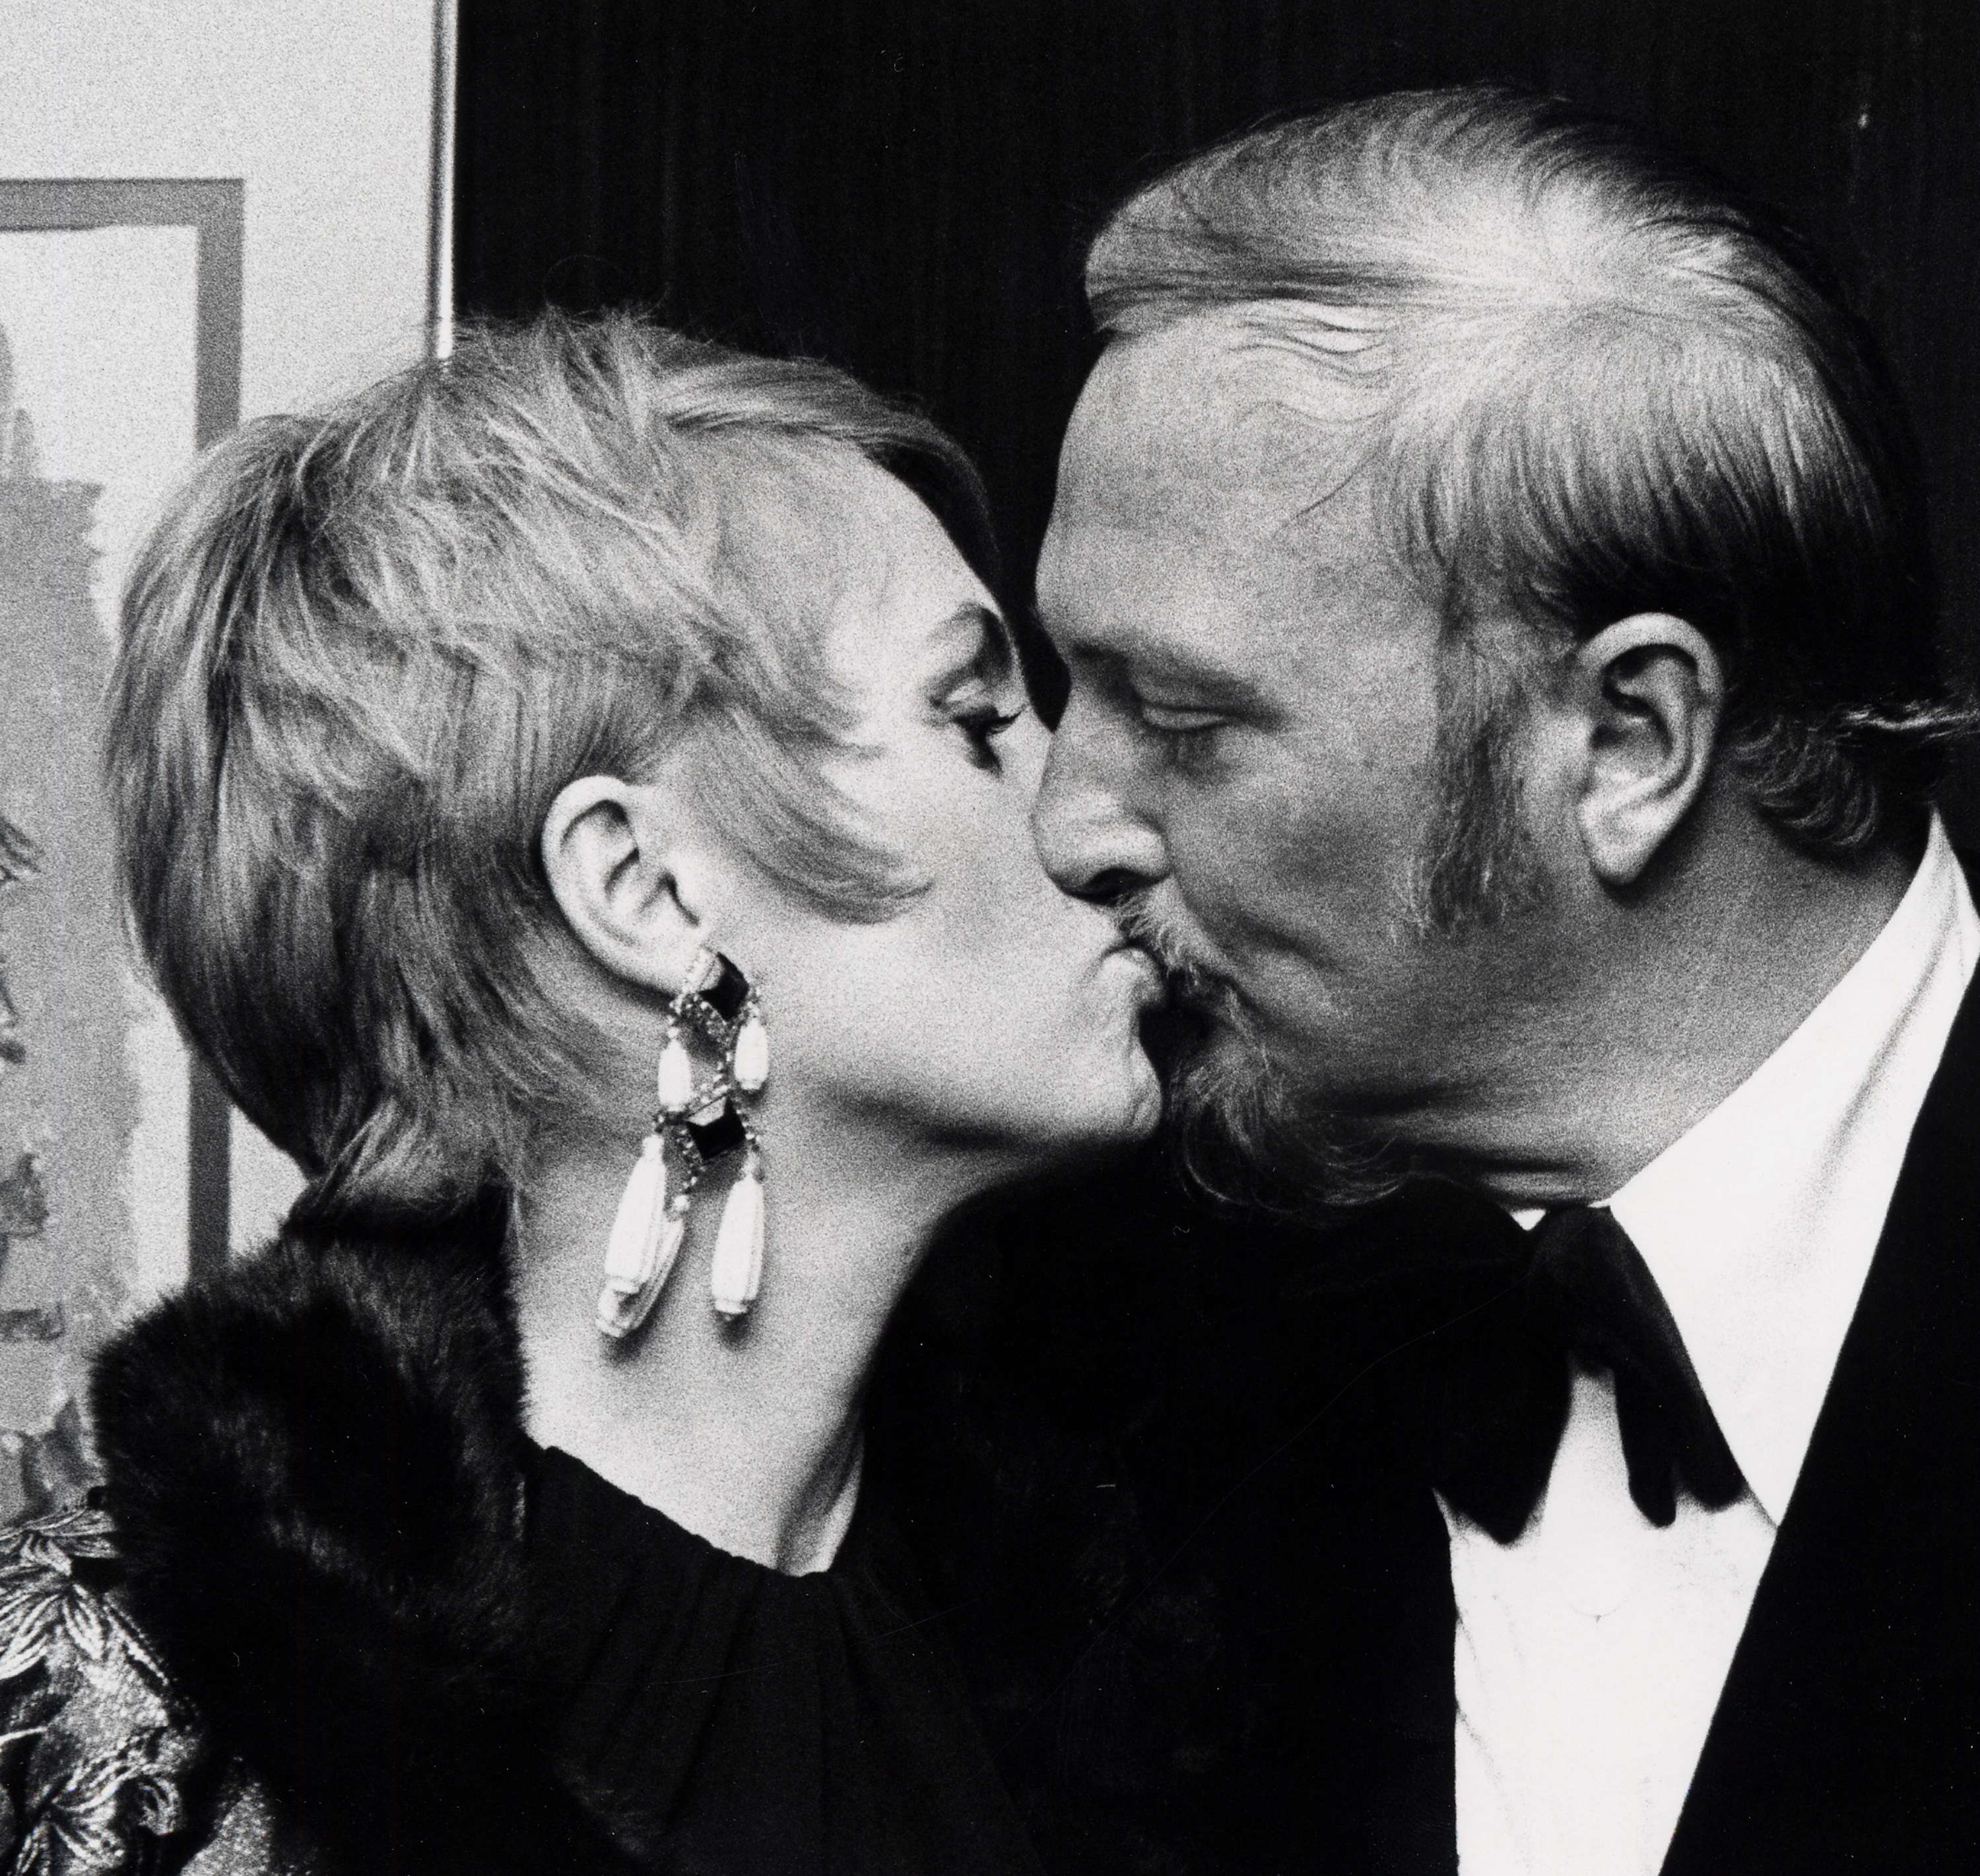 Shirley Jones and Jack Cassidy during "A Musical Tribute to Stephen Sondheim" at Shubert Theater in New York City | Source: Getty Images